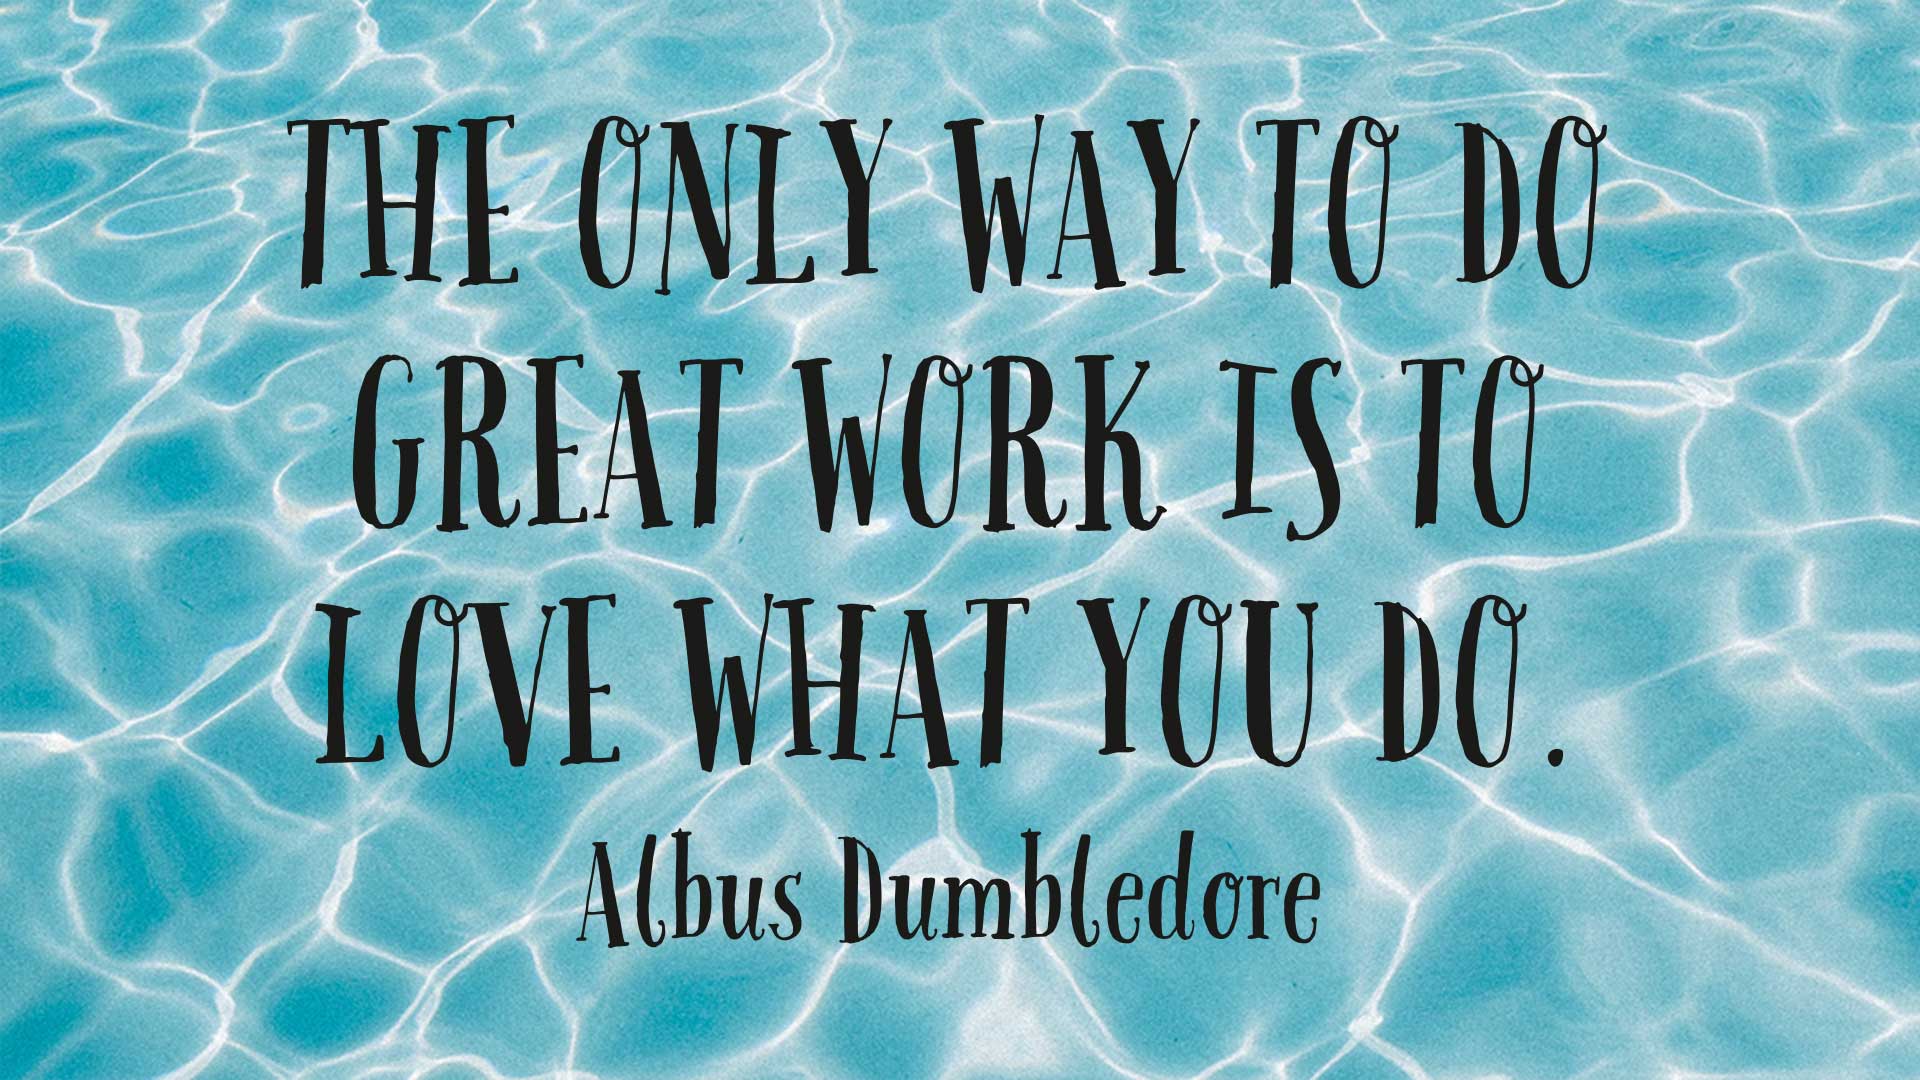 The only way to do great work is to love what you do. - Albus Dumblebore